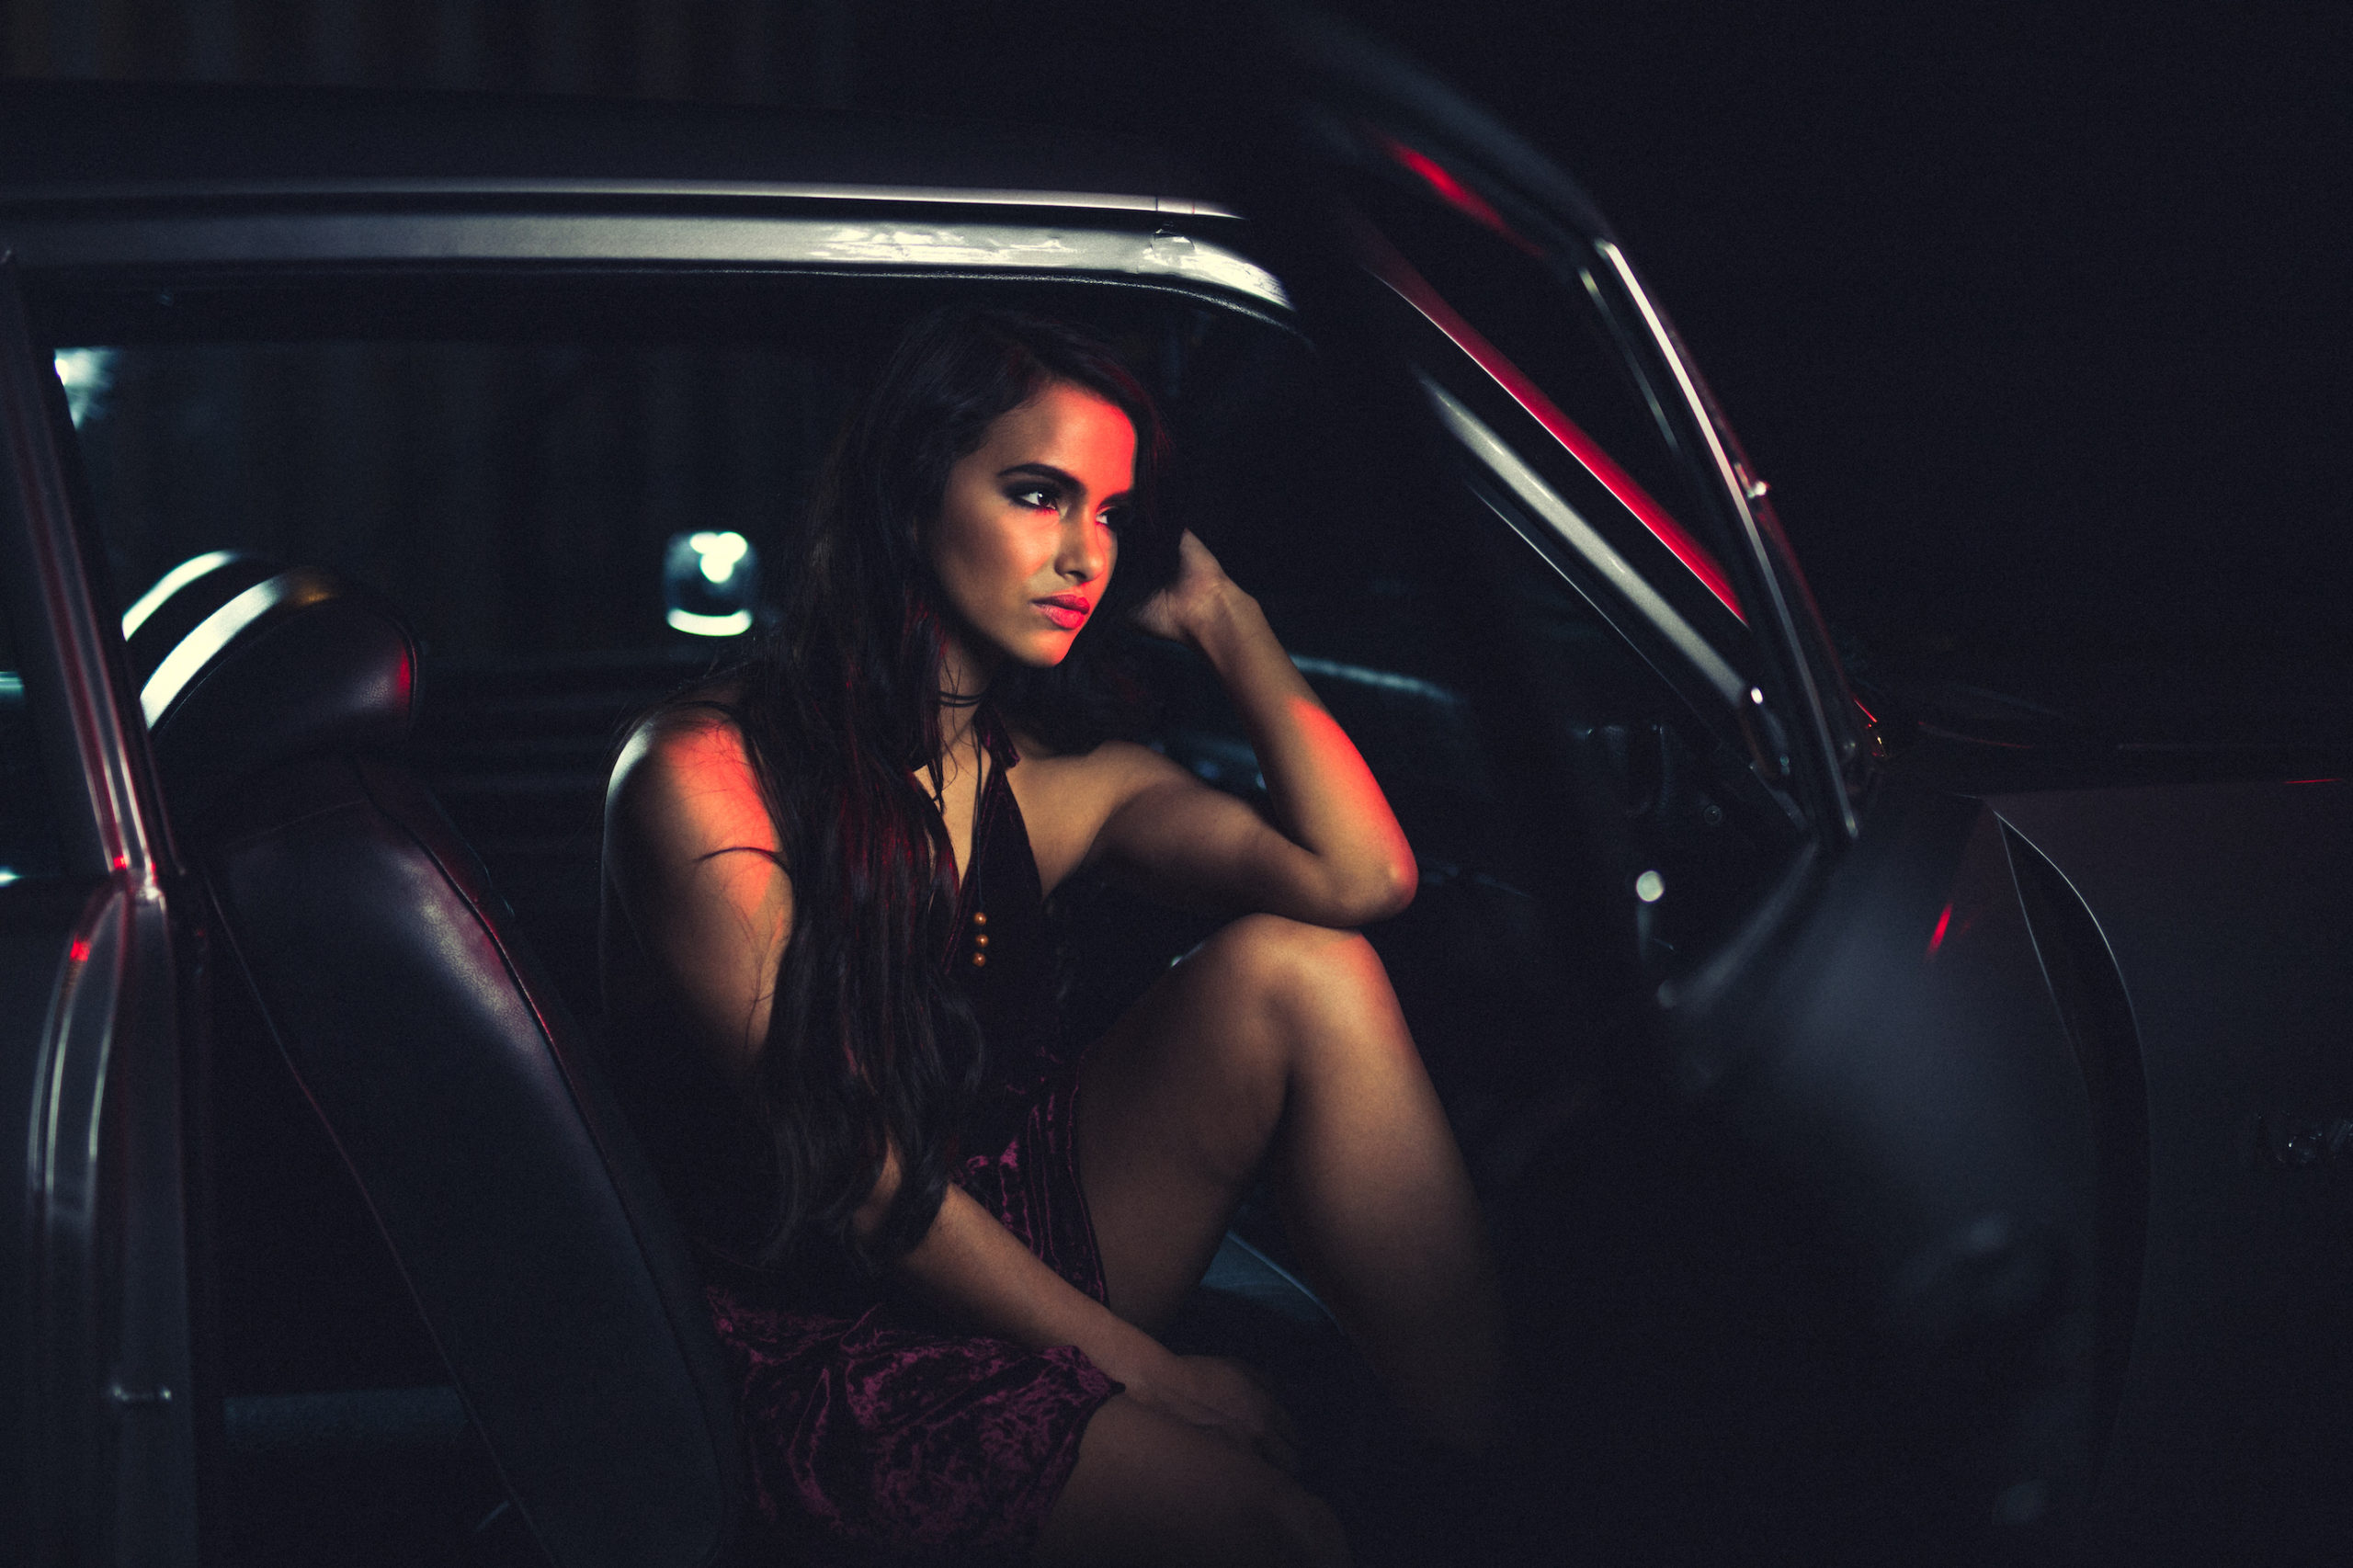 Creative Talent Agency Fort Lauderdale Model Profile Mercedes Side profile of woman with long hair wearing lingerie looking off into the distance posing for camera from the front seat of an old car